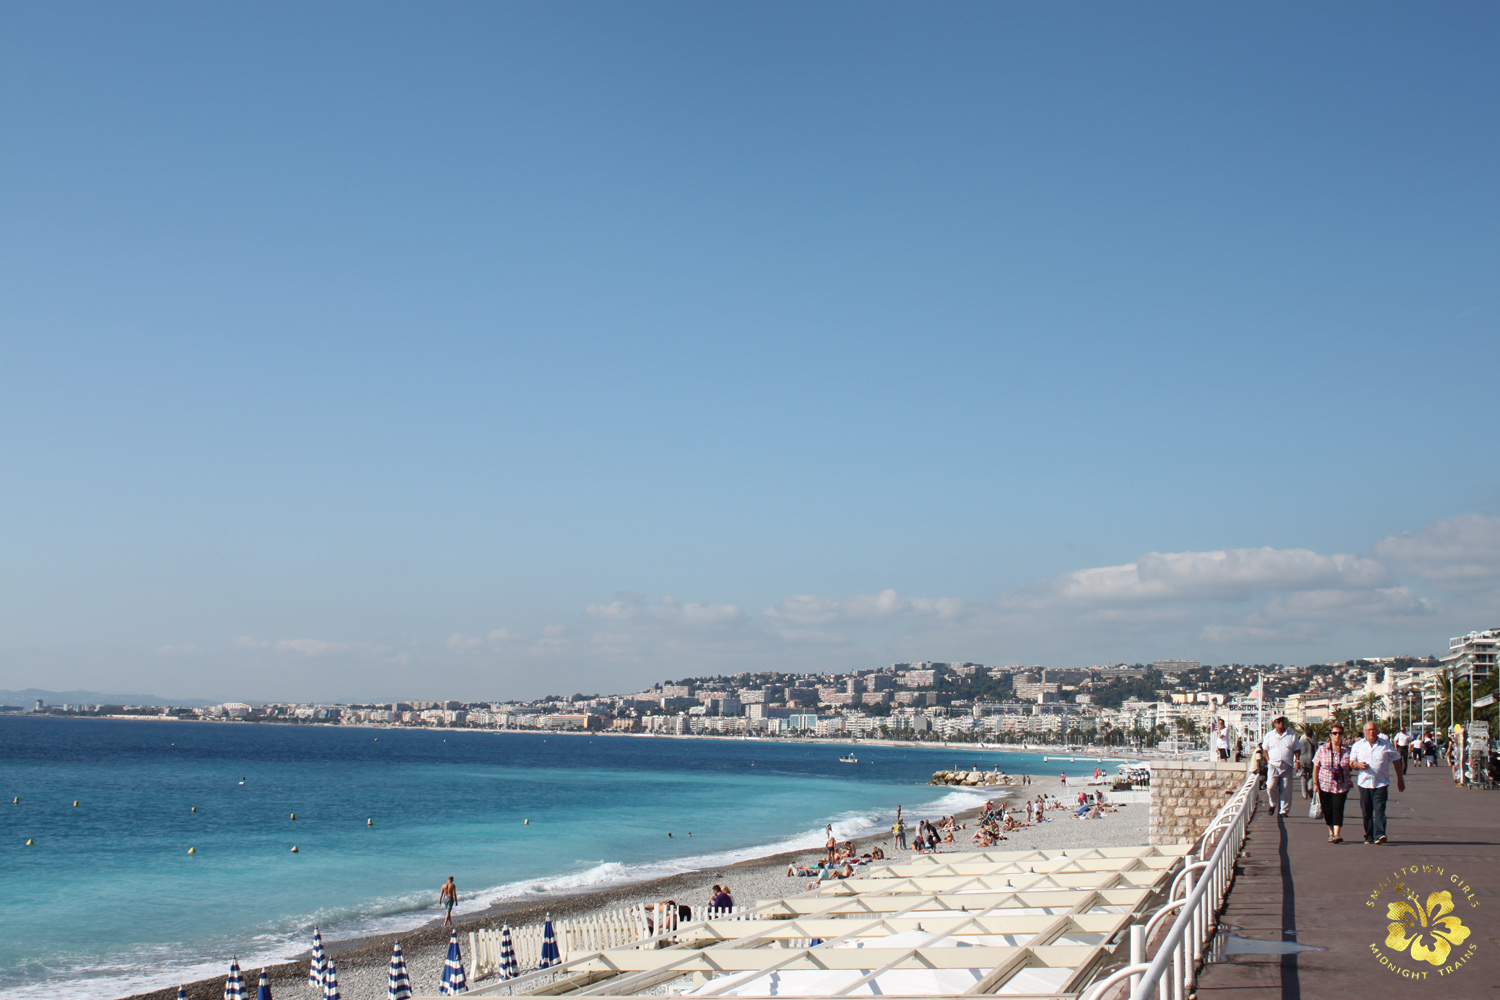 The postcard-worthy view from the Promenade des Anglais in Nice